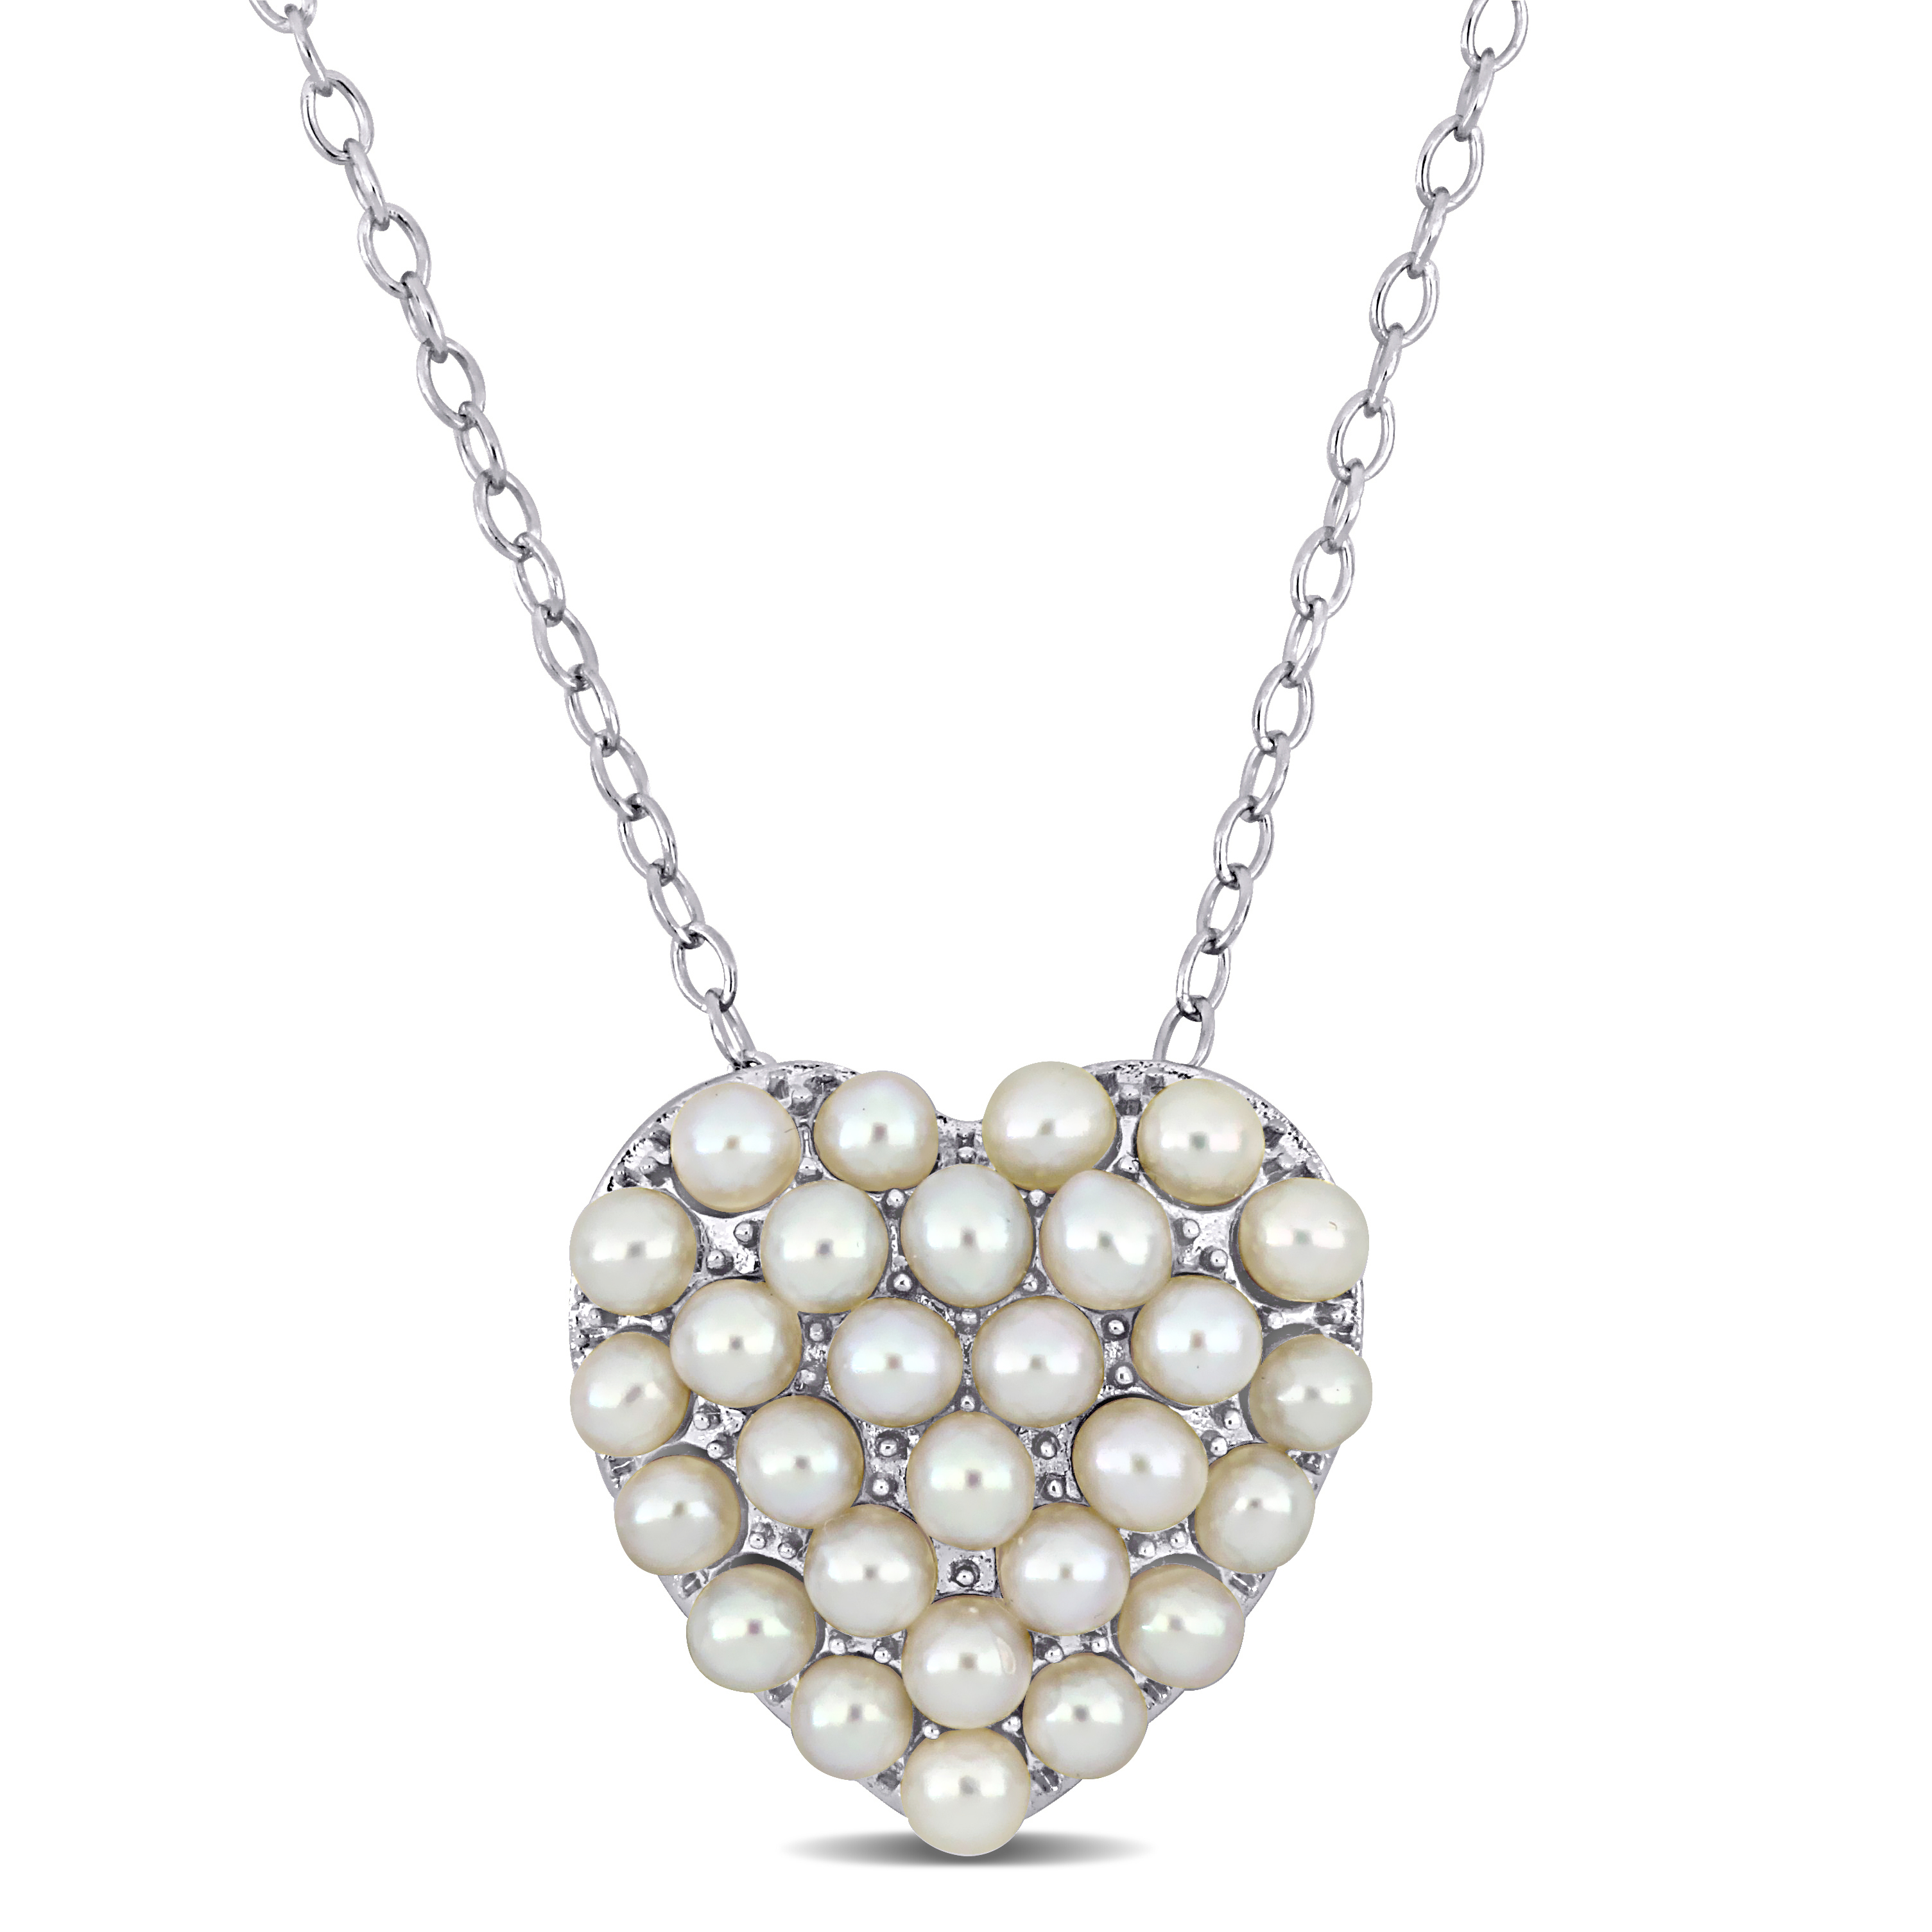 2-2.5 MM Cultured Freshwater Pearl Cluster Heart Pendant with Chain in Sterling Silver - 18 in.